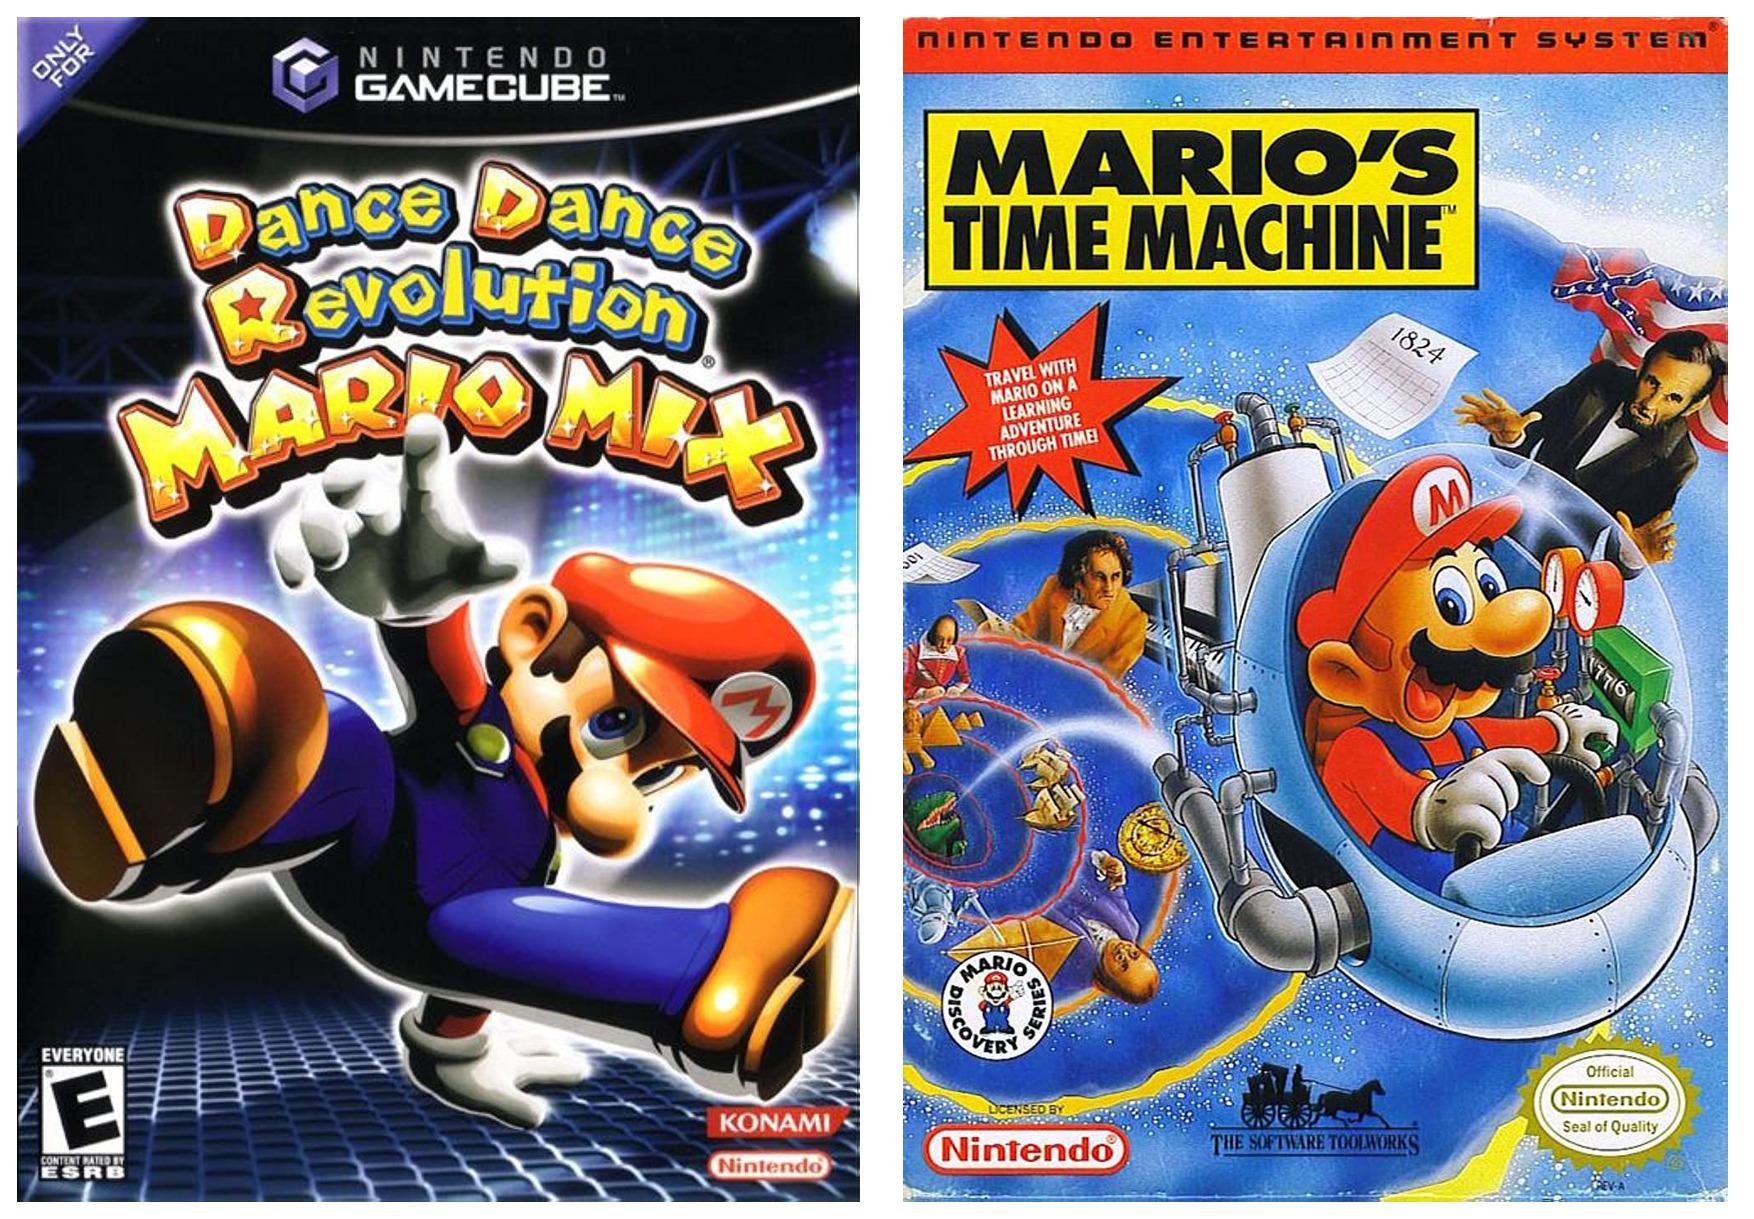 March 10 is often labeled Mario day due to the date, Mar. 10 looking like the word Mario. The beloved character had appeared in several unique titles that some may not know as well.